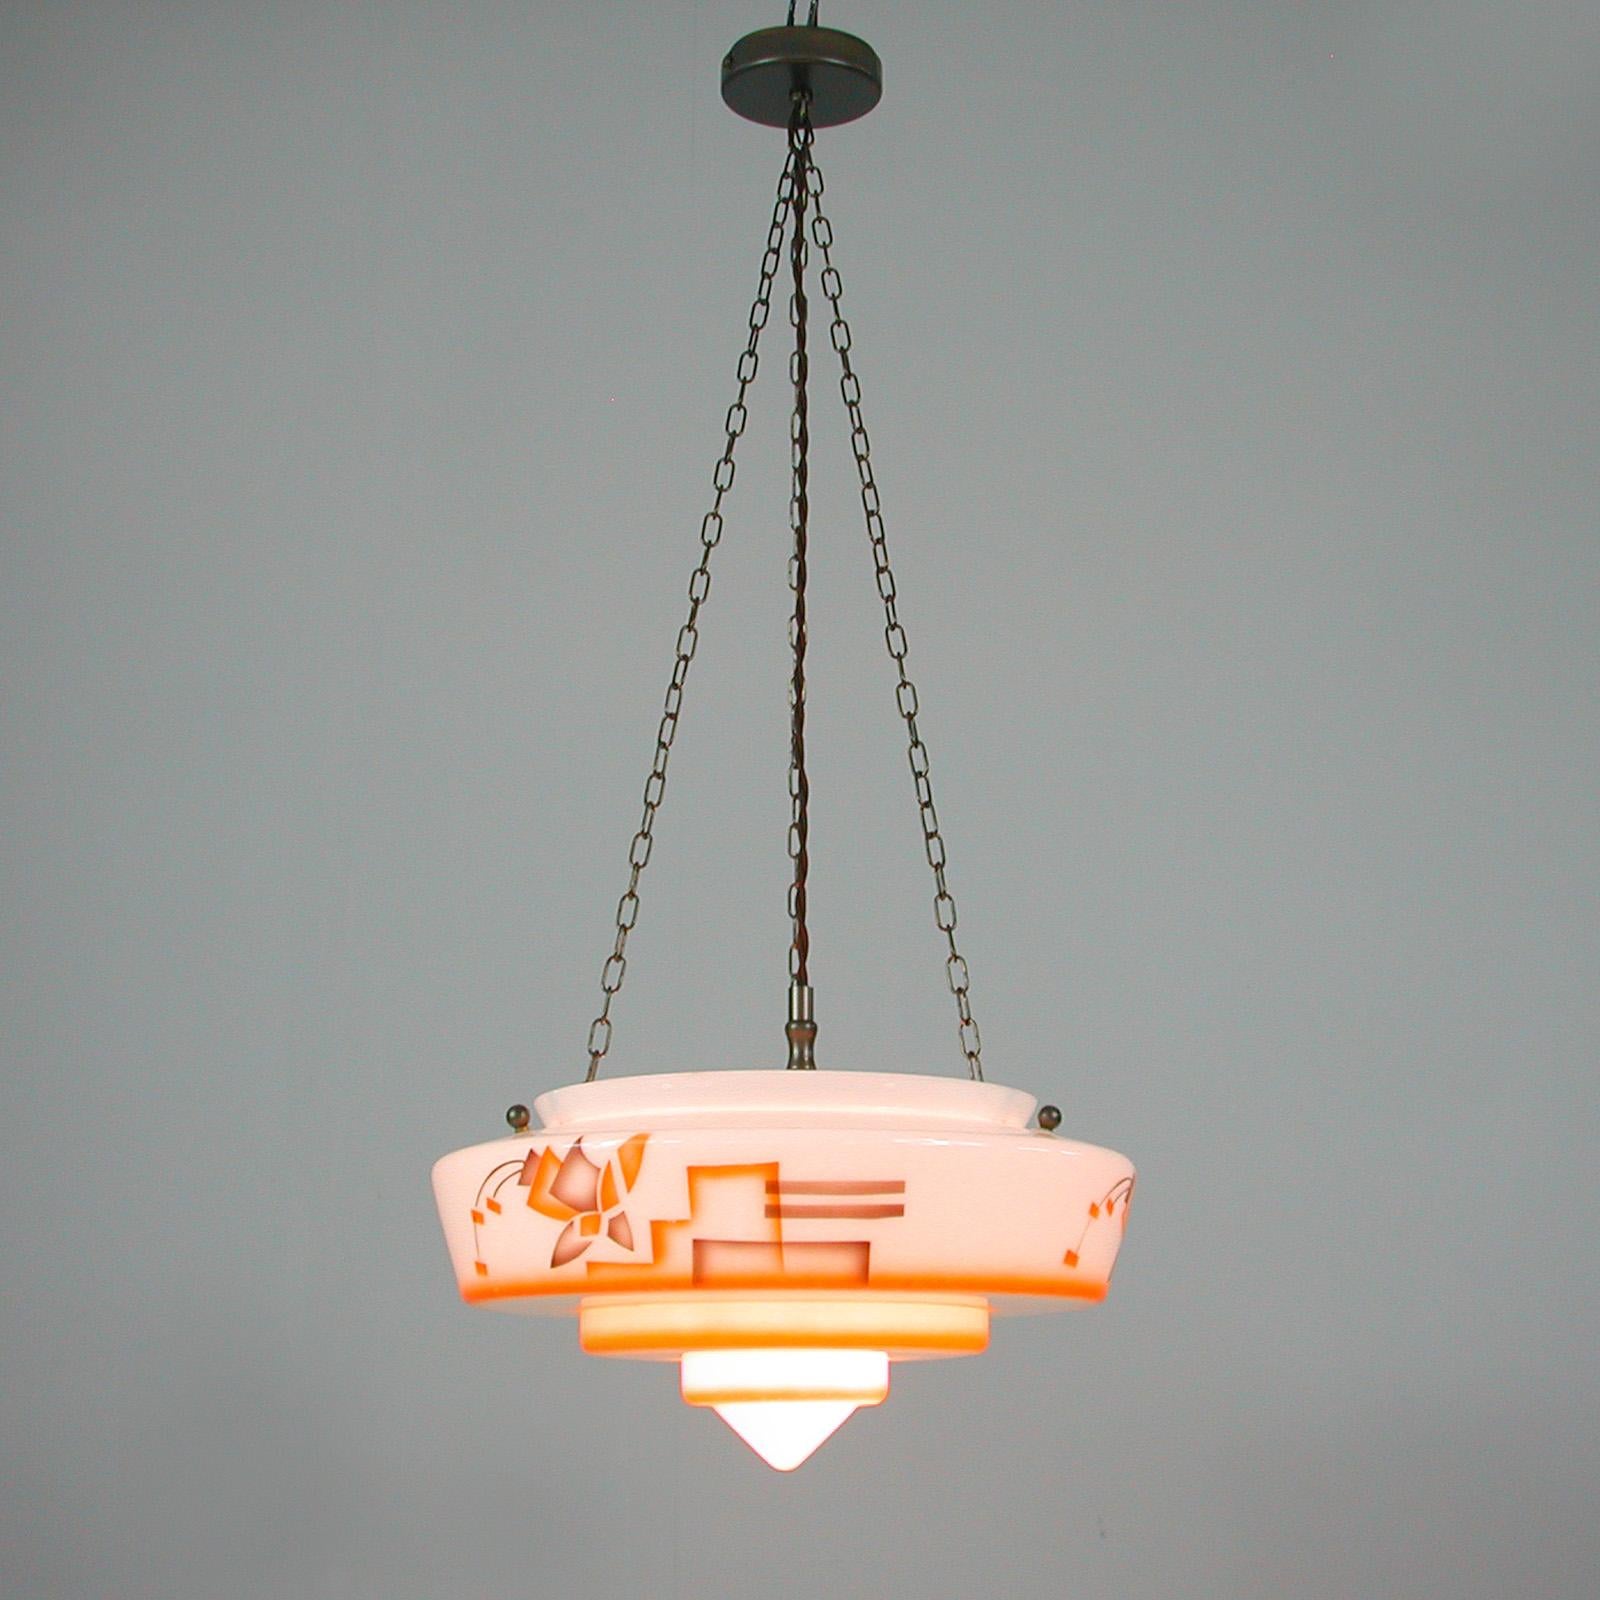 German Art Deco Suspension Light, Enameled Glass and Brass, 1930s For Sale 12